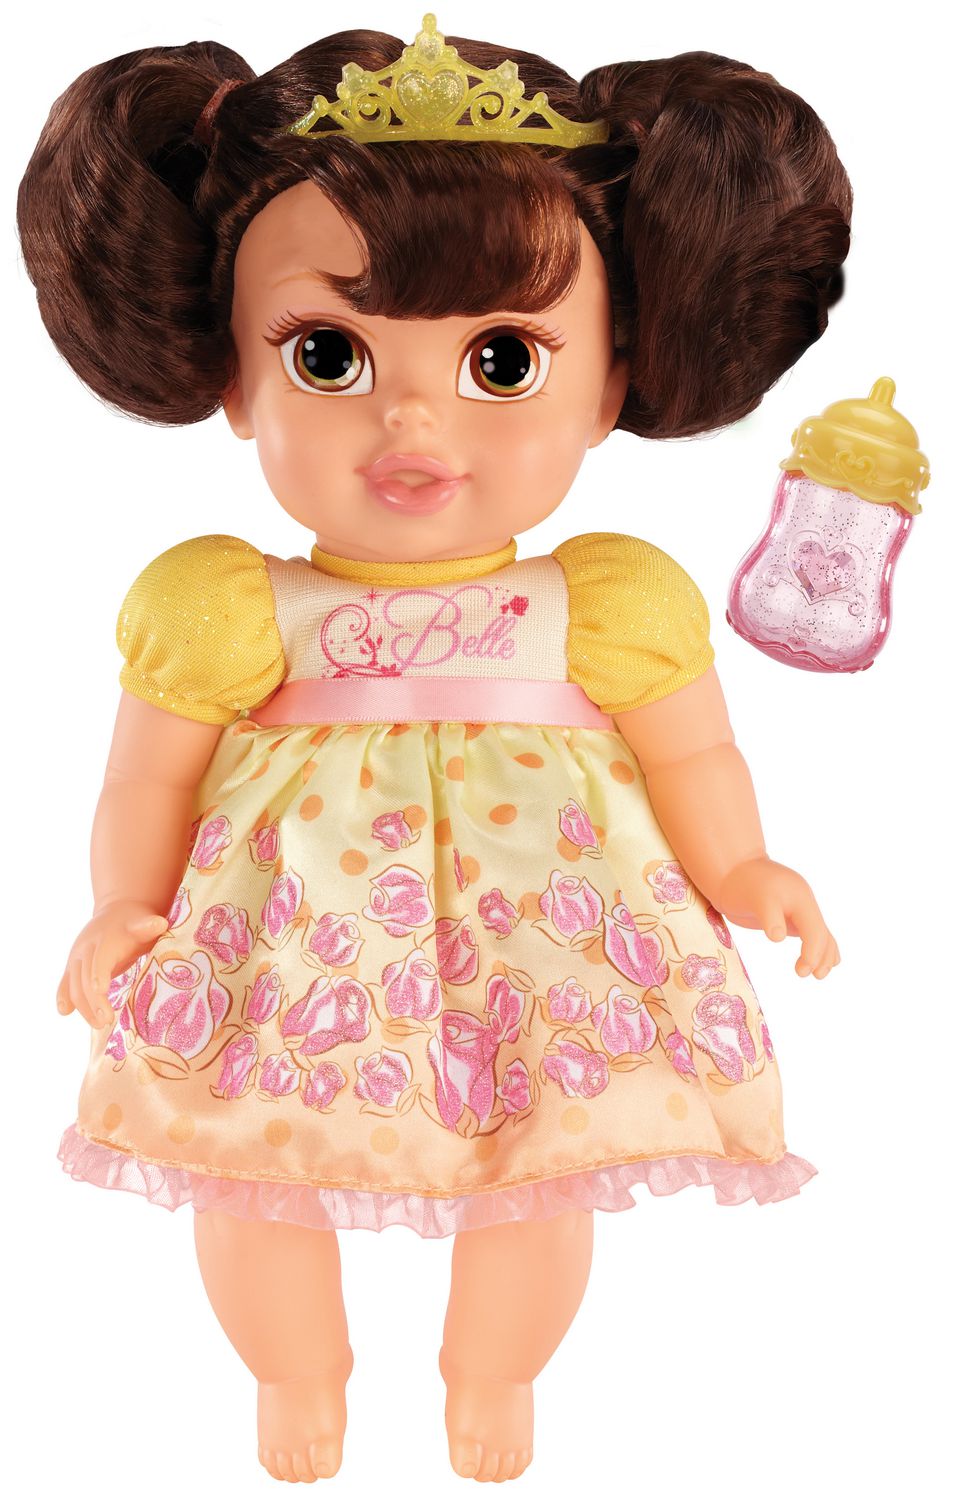 belle baby doll